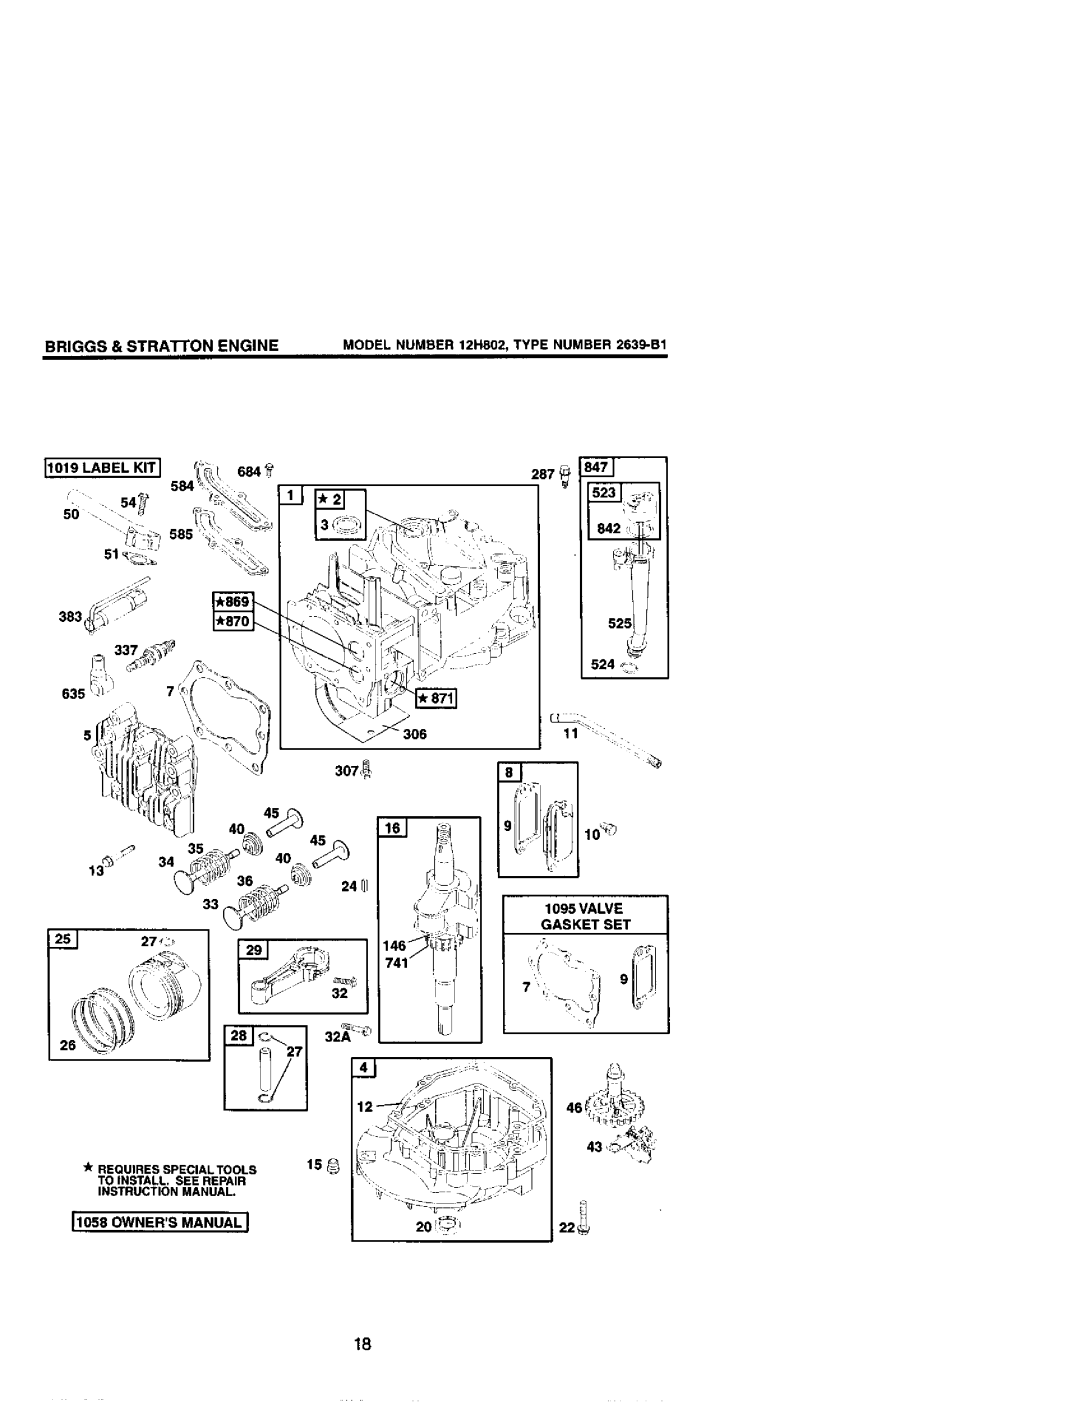 Craftsman 944.36153 owner manual 525 524 £, 201, k REQUIRES SPECIALTOOLS, To Install, See Repair, Instruction, Manual 